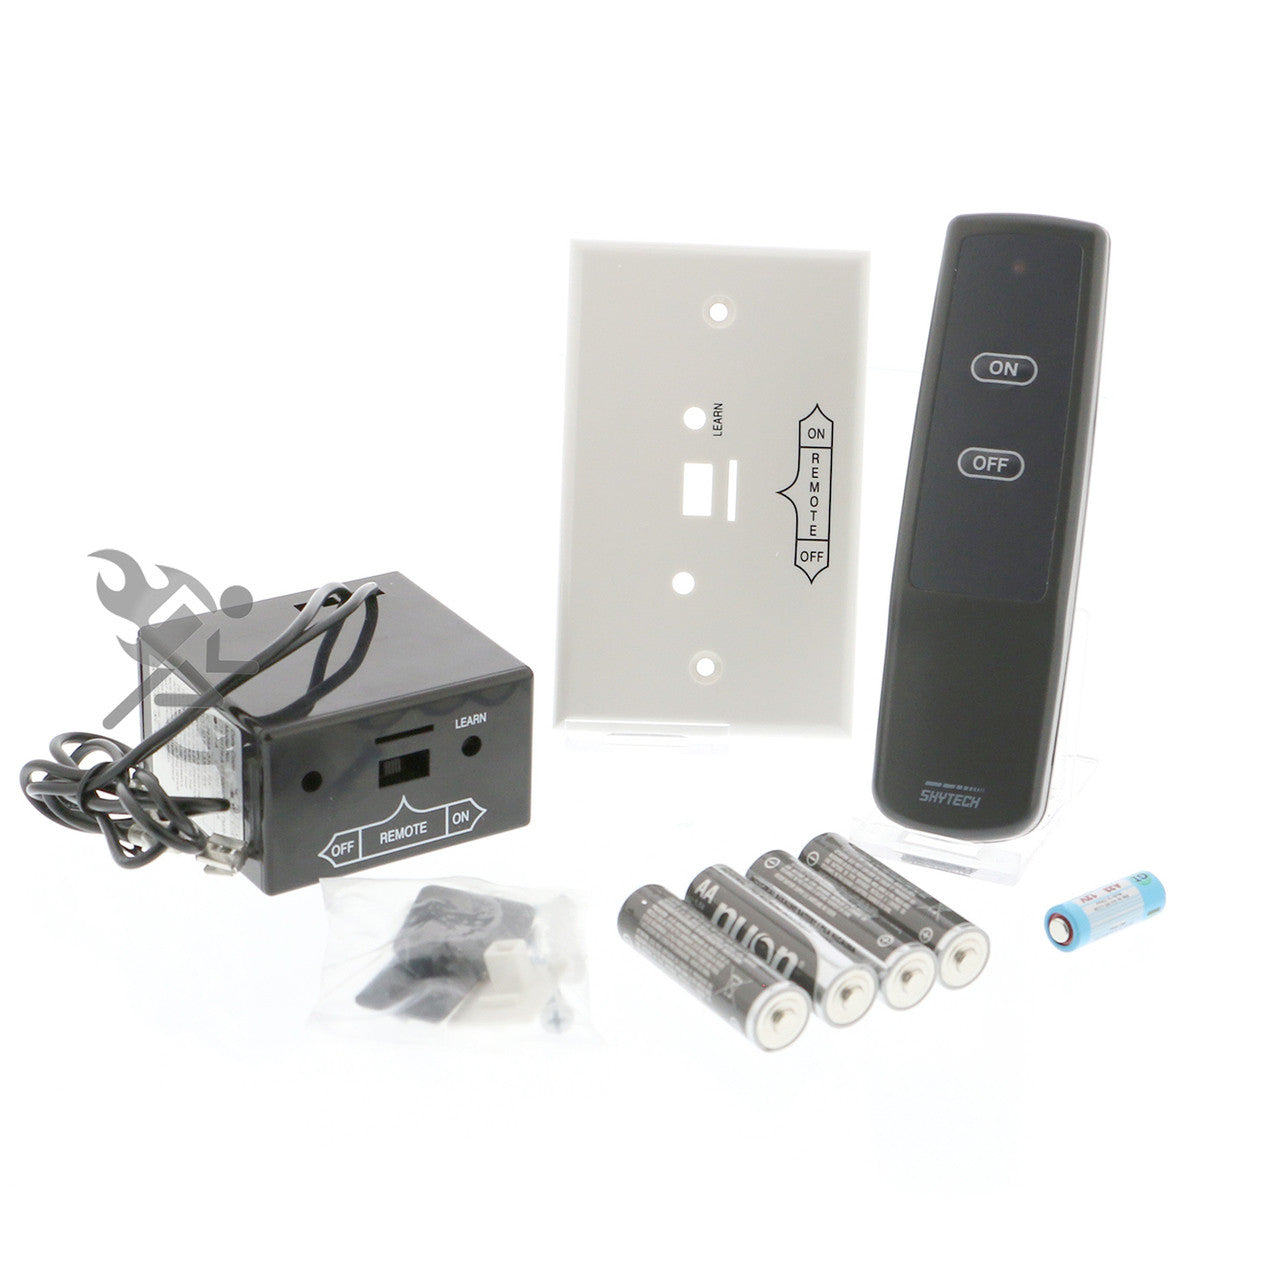 1001-A Battery Operated On/Off Fireplace Remote Control Kit